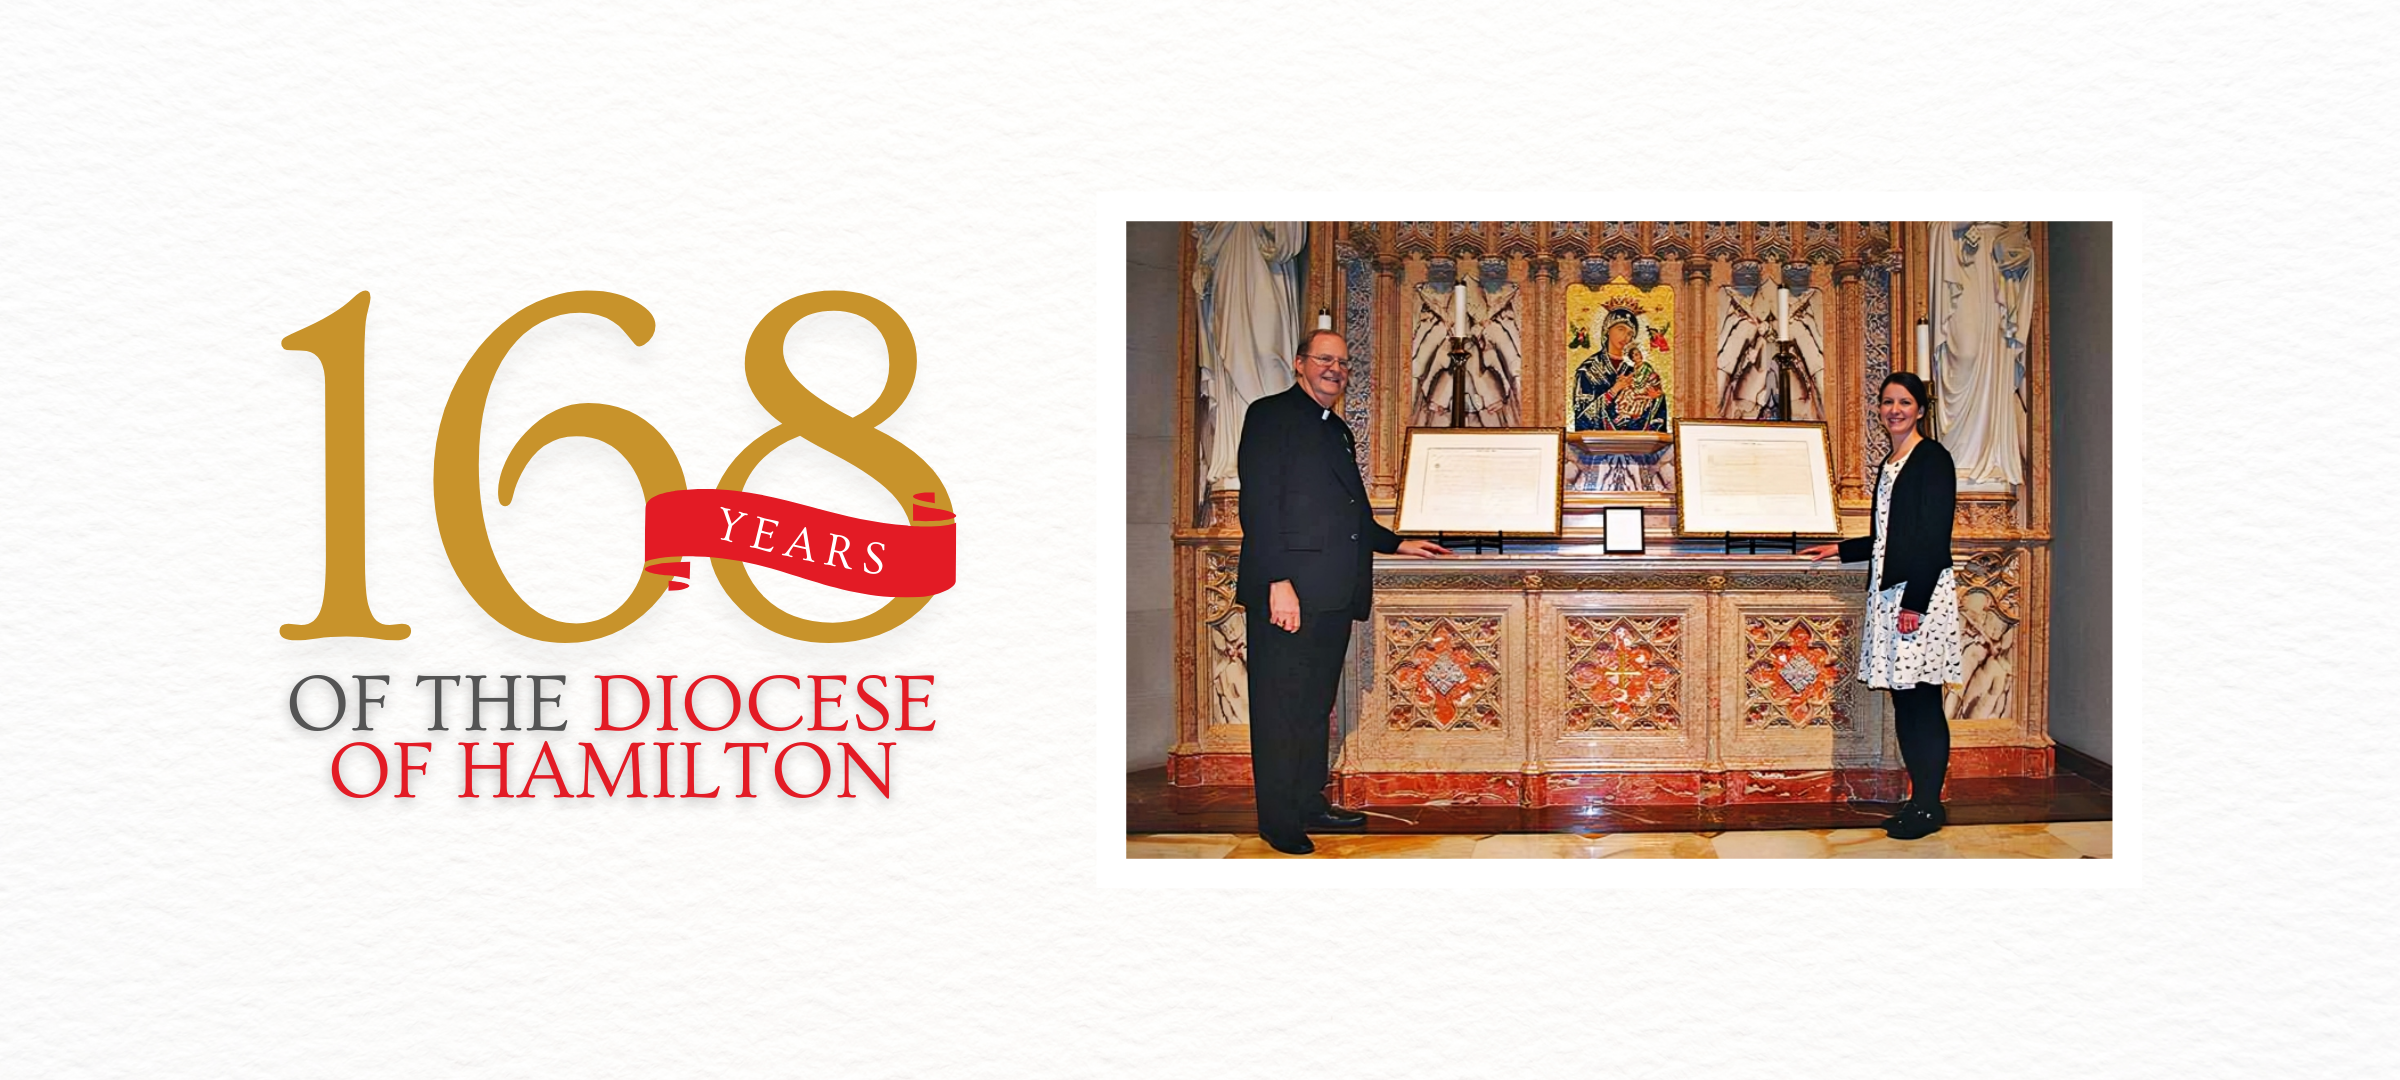 Heart to Heart: 168 Years of the Diocese of Hamilton